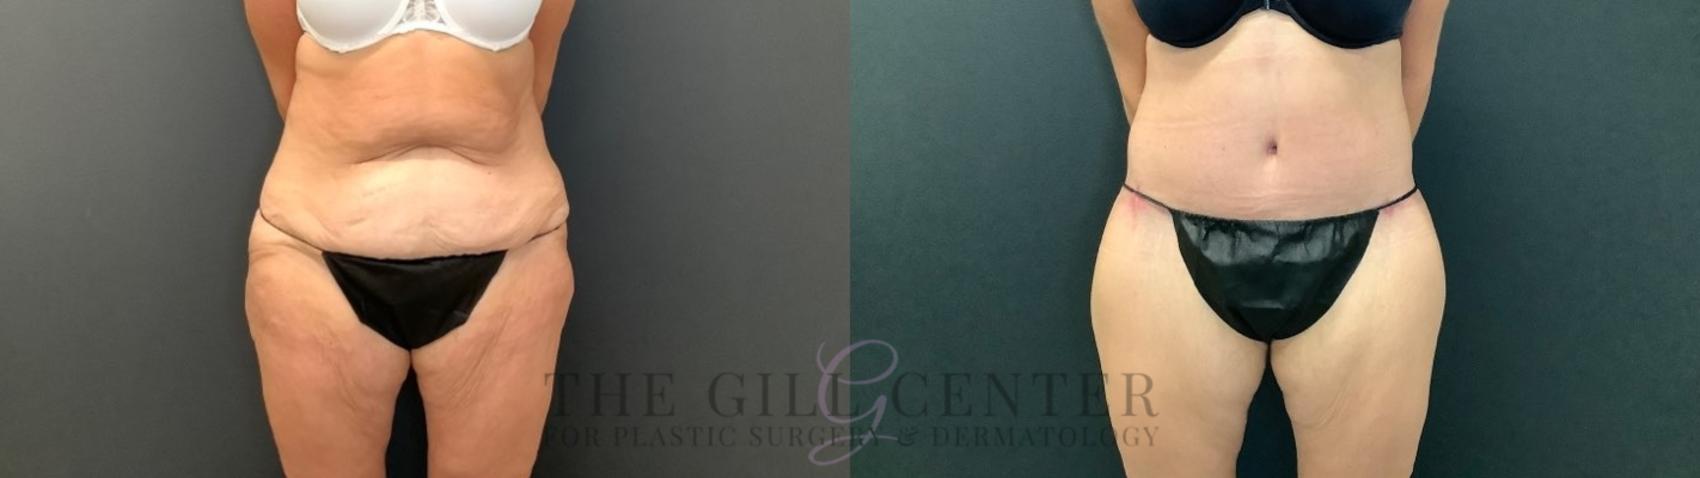 Body Lift Case 480 Before & After Front | The Woodlands, TX | The Gill Center for Plastic Surgery and Dermatology